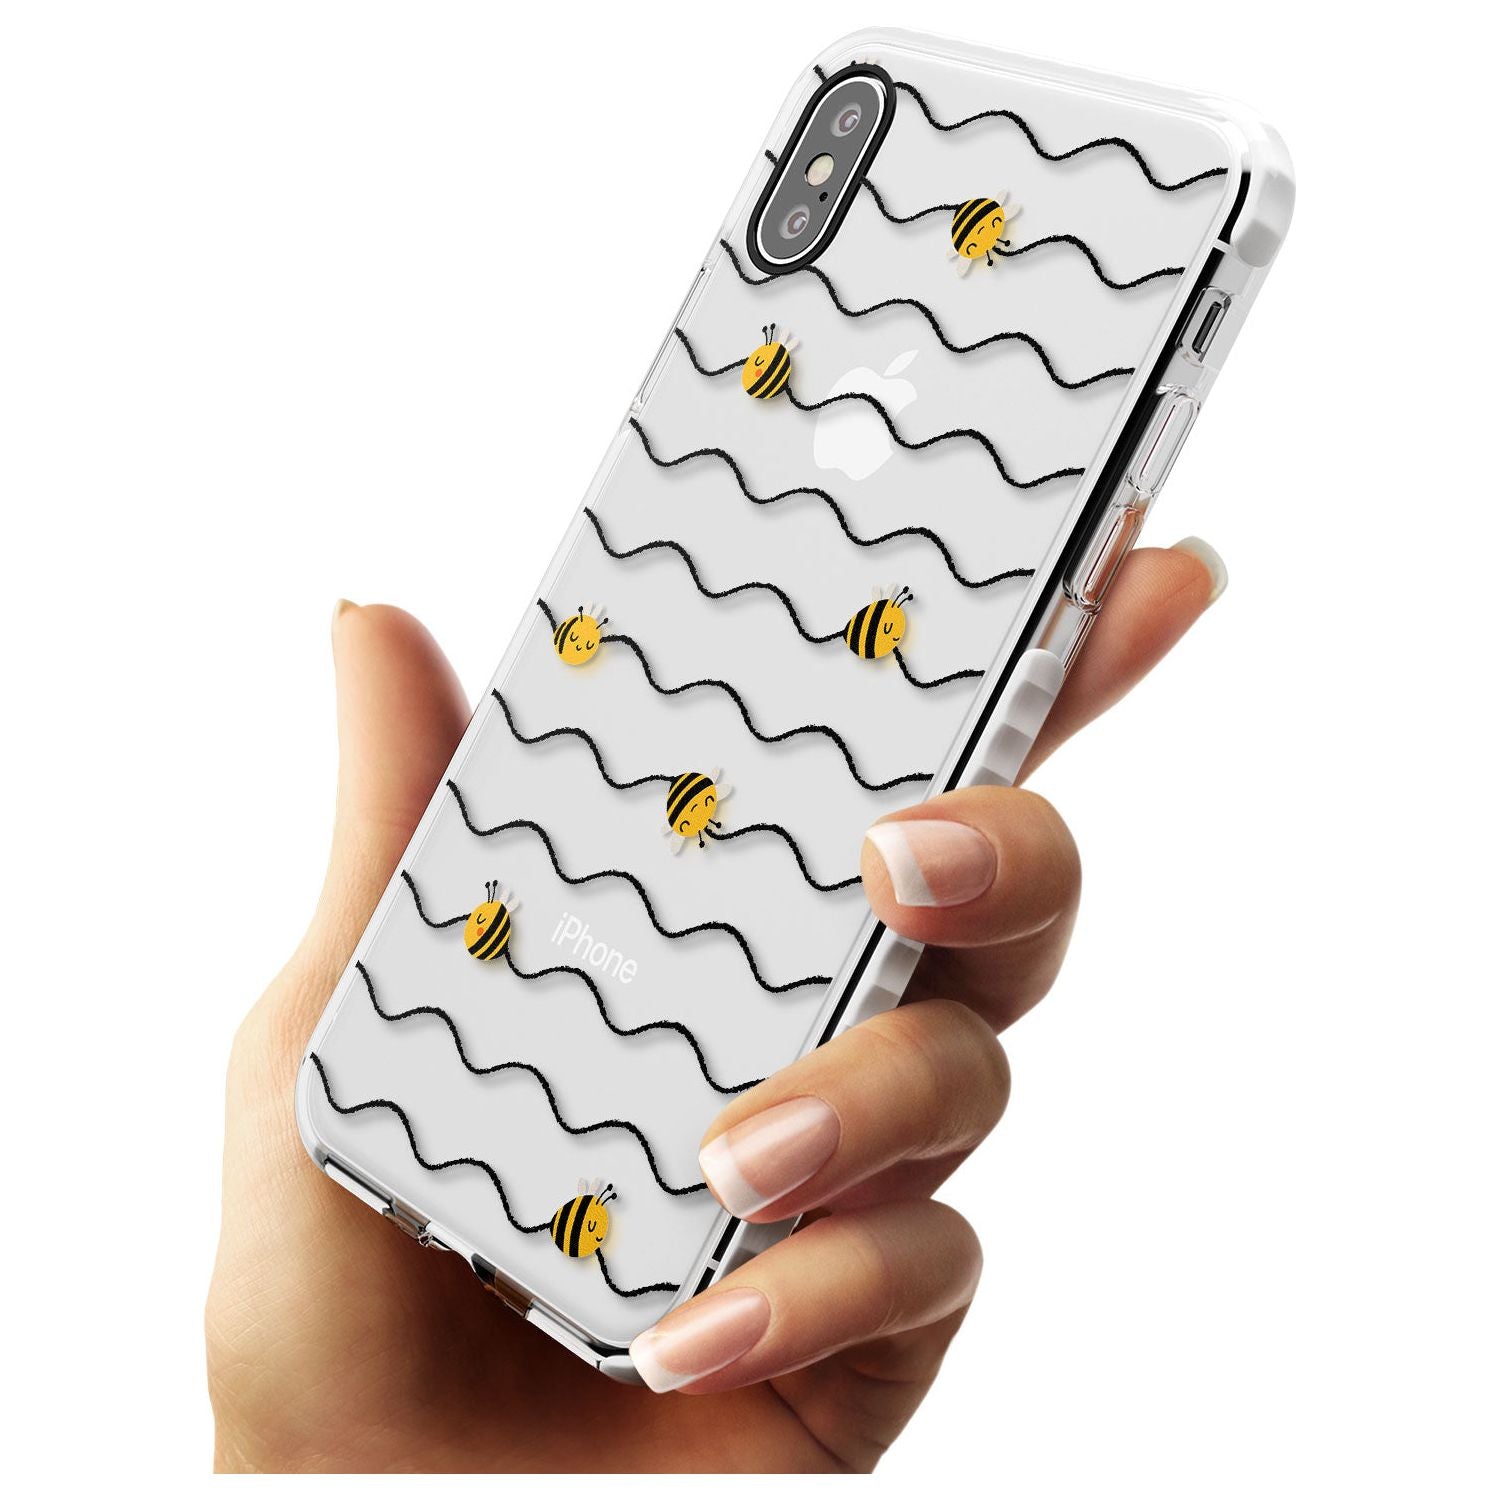 Sweet as Honey Patterns: Bees & Stripes (Clear) Impact Phone Case for iPhone X XS Max XR